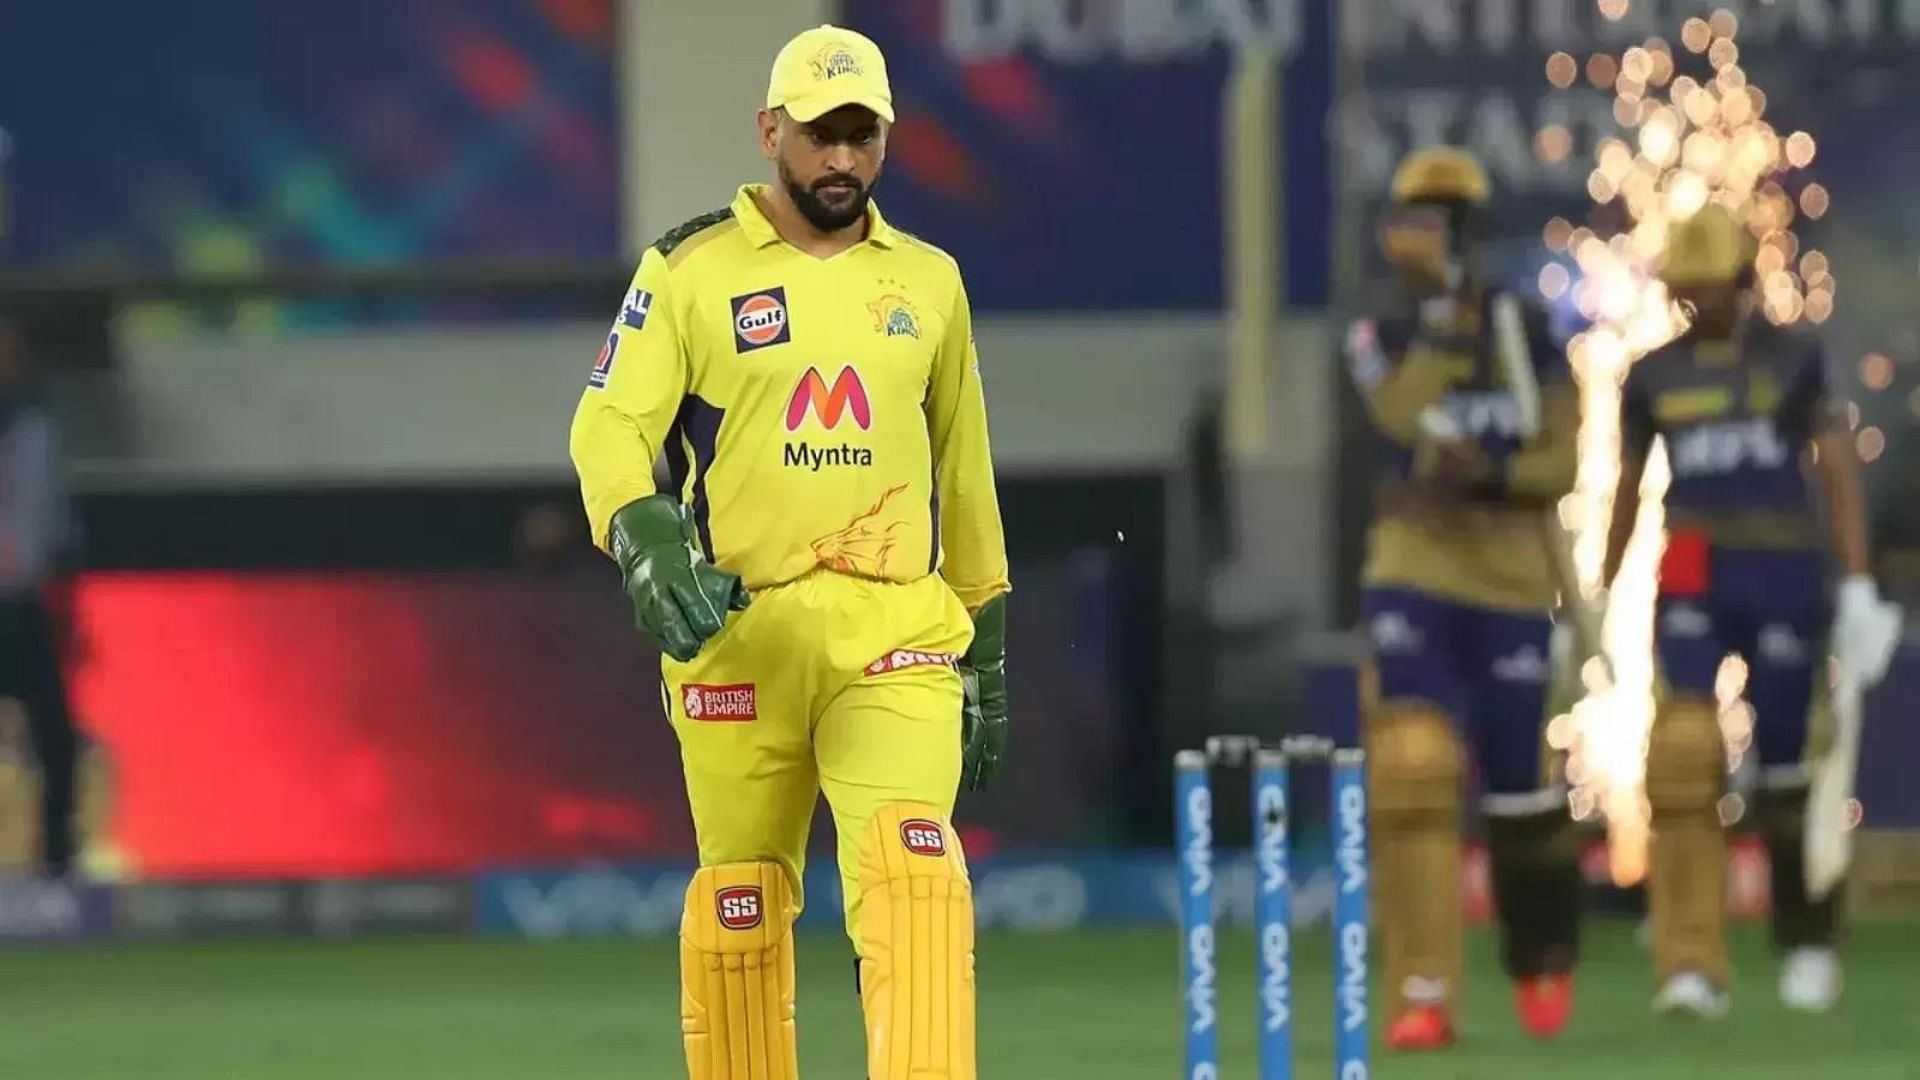 MS Dhoni could be playing his final IPL season and would want to end on a high with CSK (P.C.:Twitter)